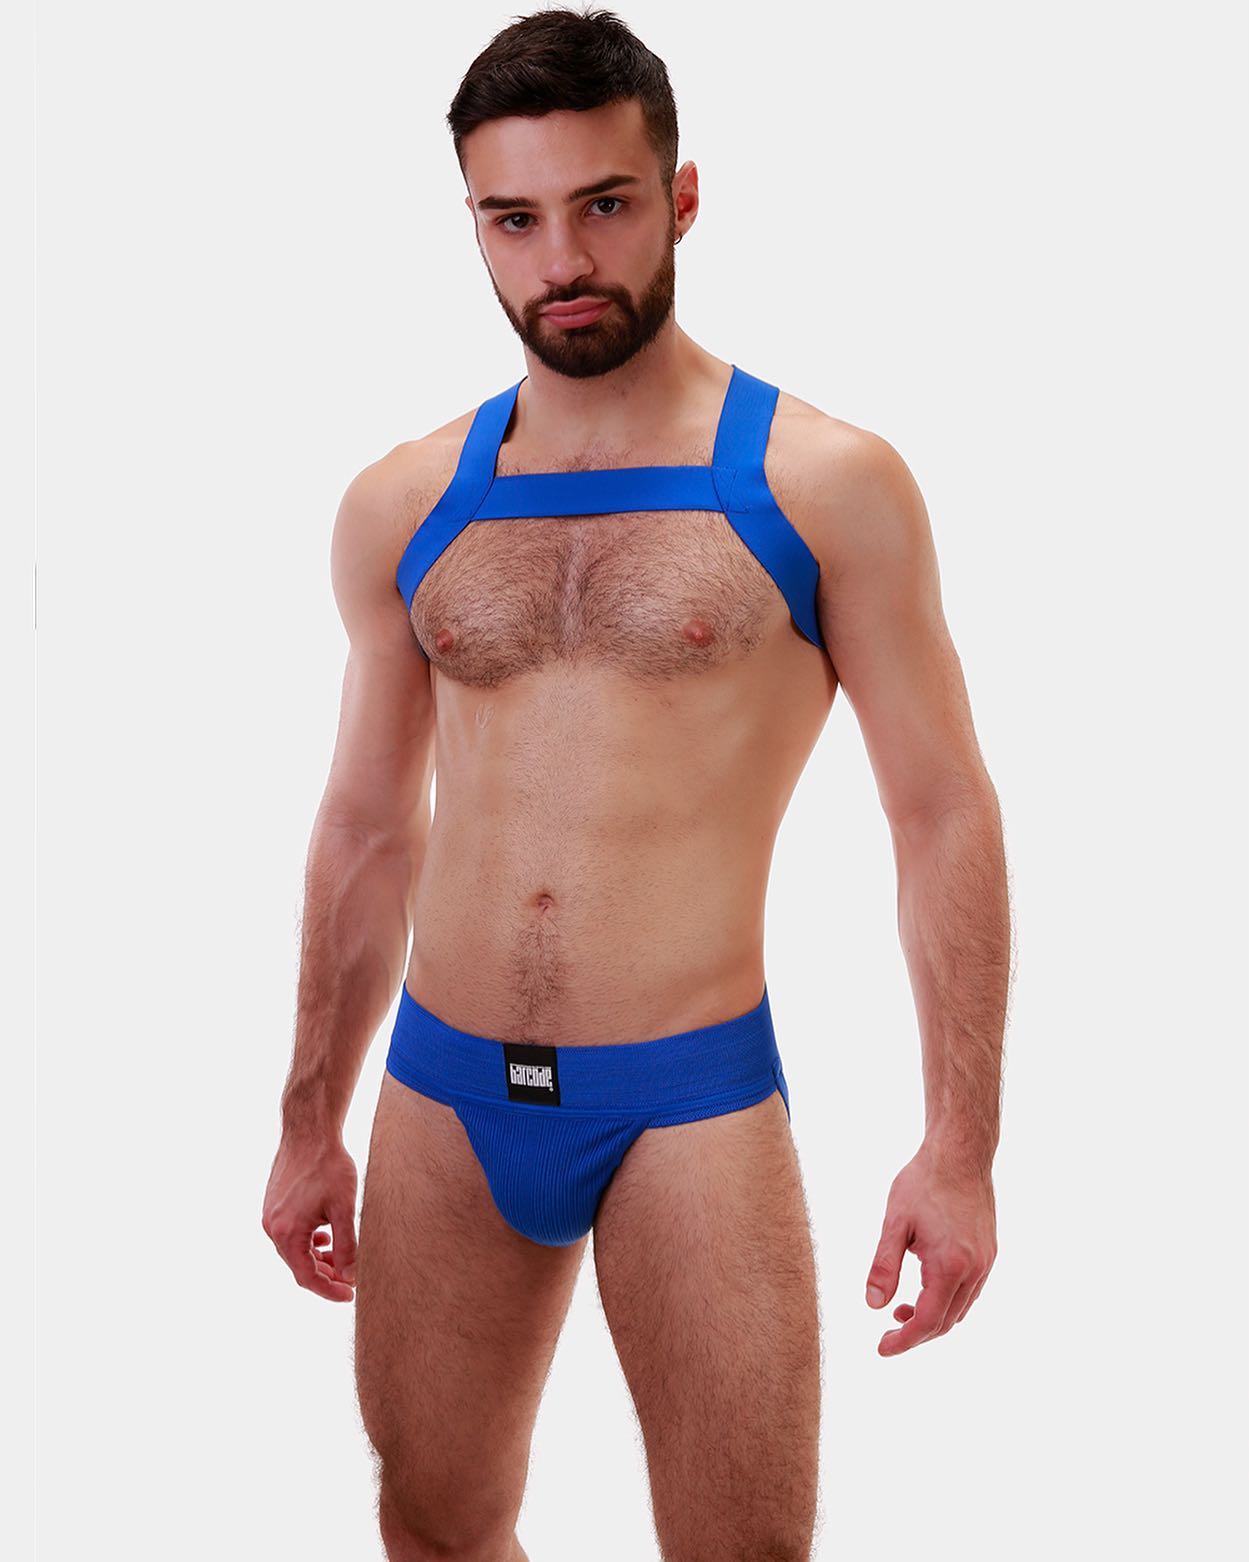 Check out the timeless and best-selling Sergey and Andreus Jockstraps of Barcode Berlin in different colour combinations. Read about them and choose your favourite hue: 
____
https://www.menandunderwear.com/2022/10/the-iconic-jocks-sergey-and-andreus-by-barcode-berlin.html